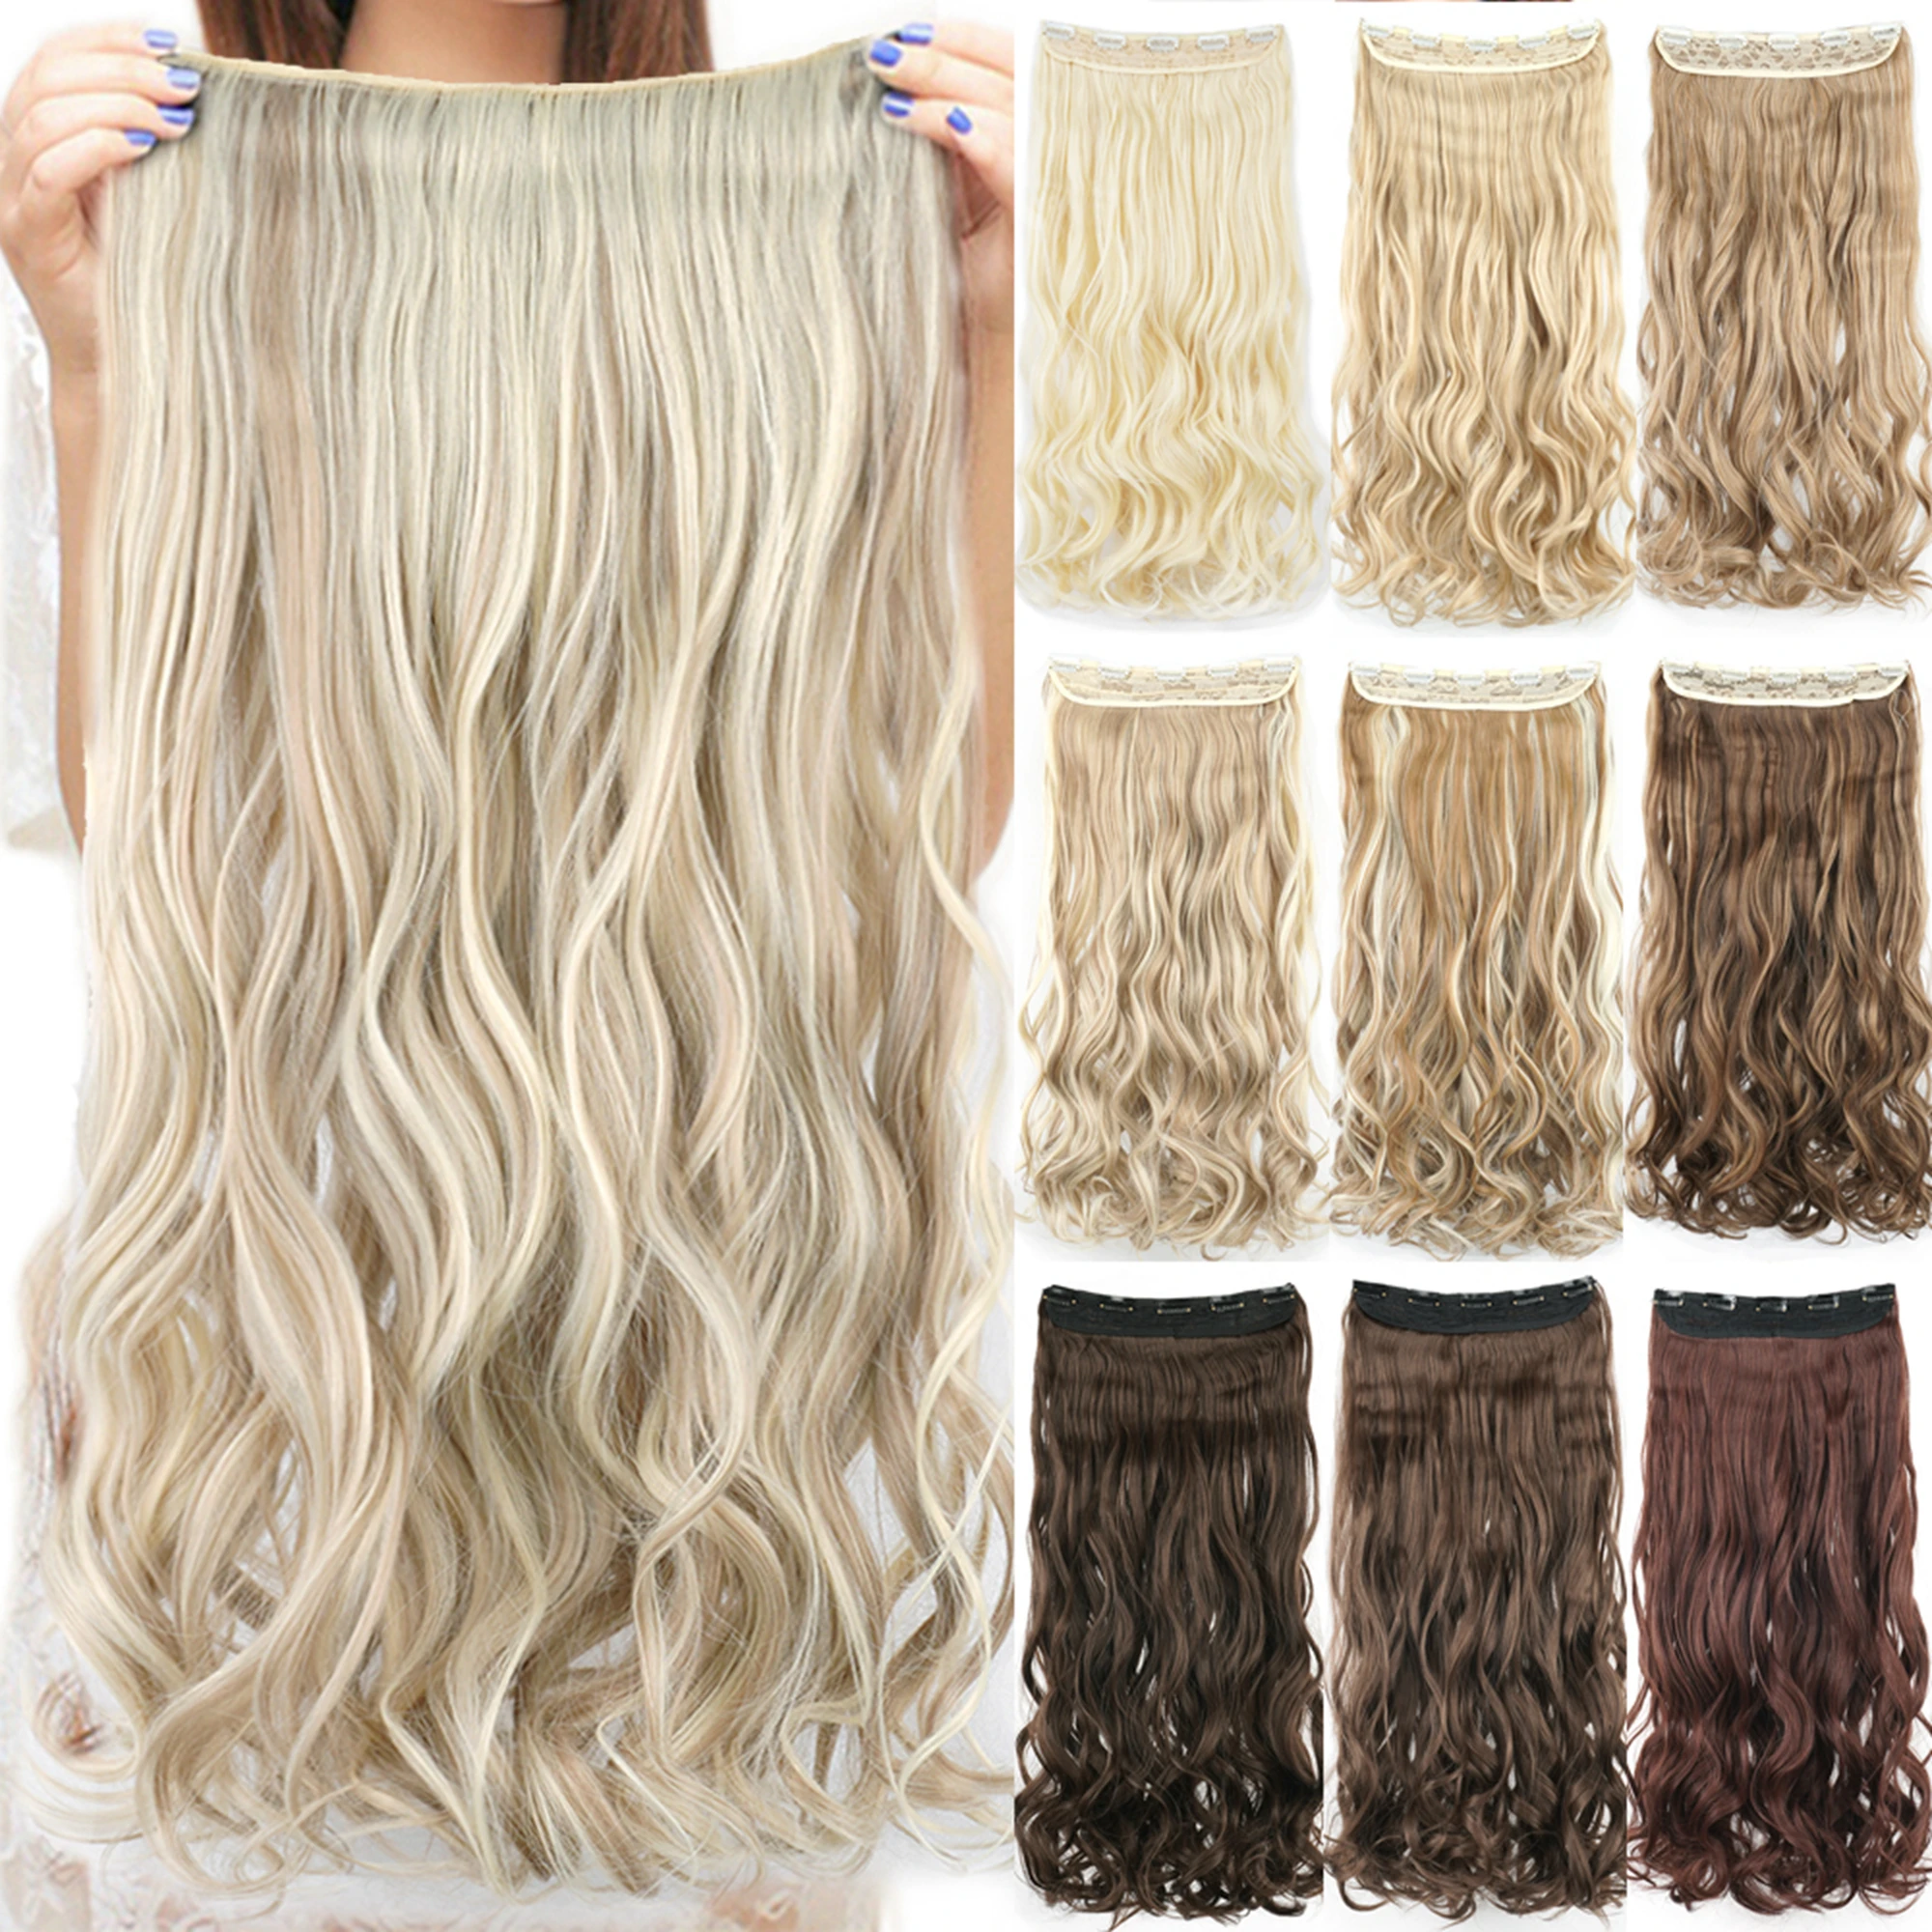 Soowee 24" 28'' Long Synthetic Hair Dirty Blonde Curly Thick Clip In Hair Extension One Piece Fake Hairpiece Clip Ins for Women